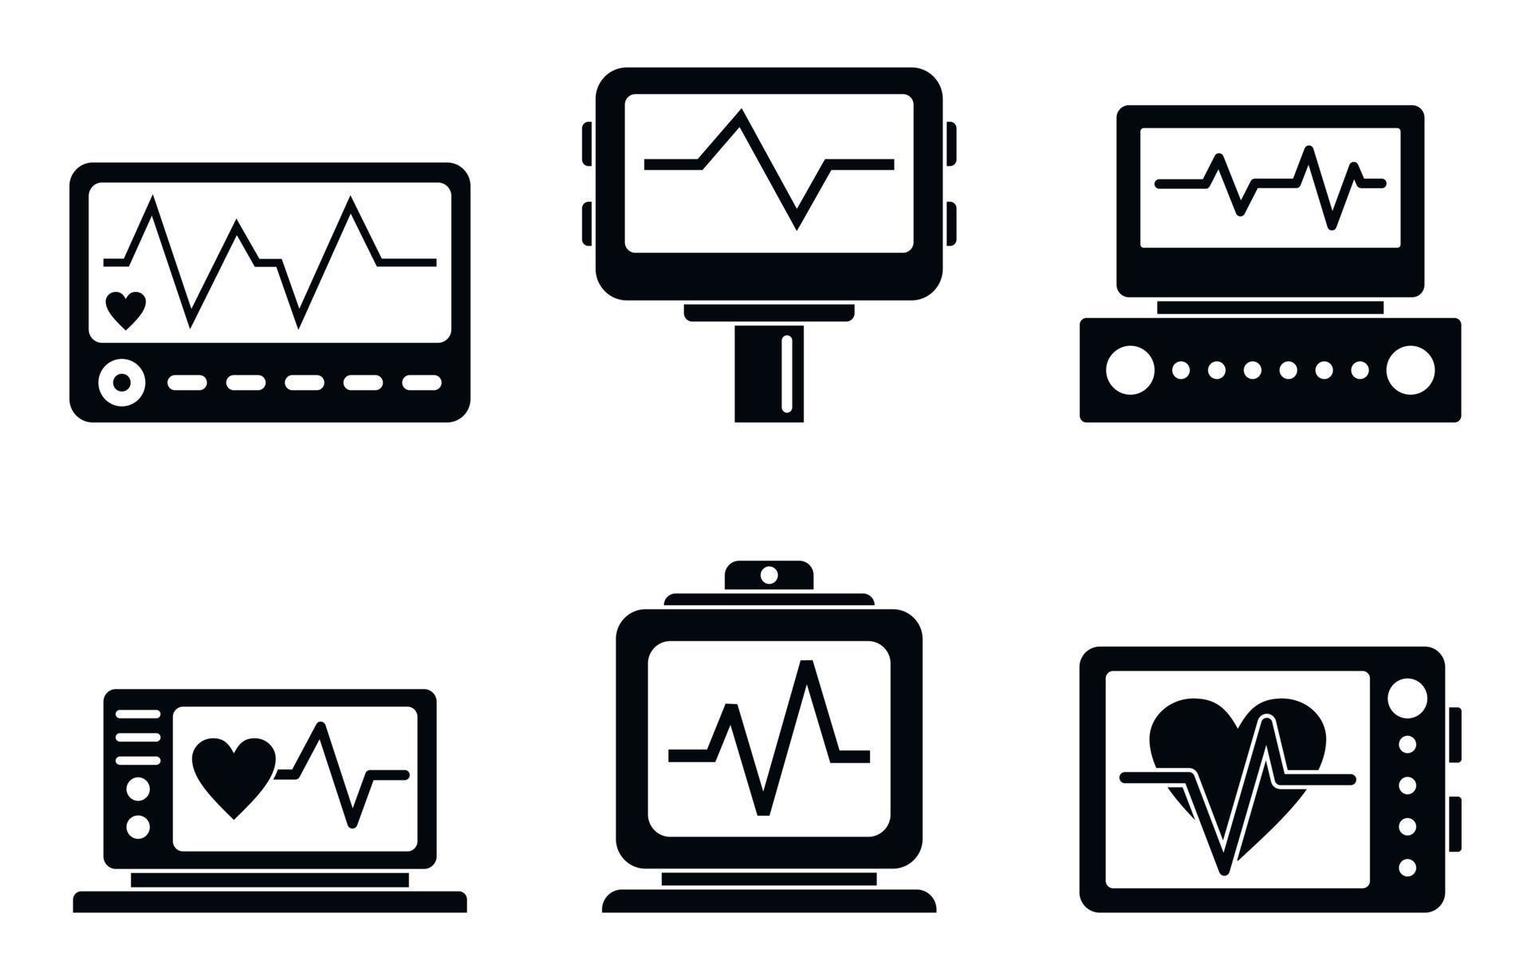 Electrocardiogram icons set, simple style vector